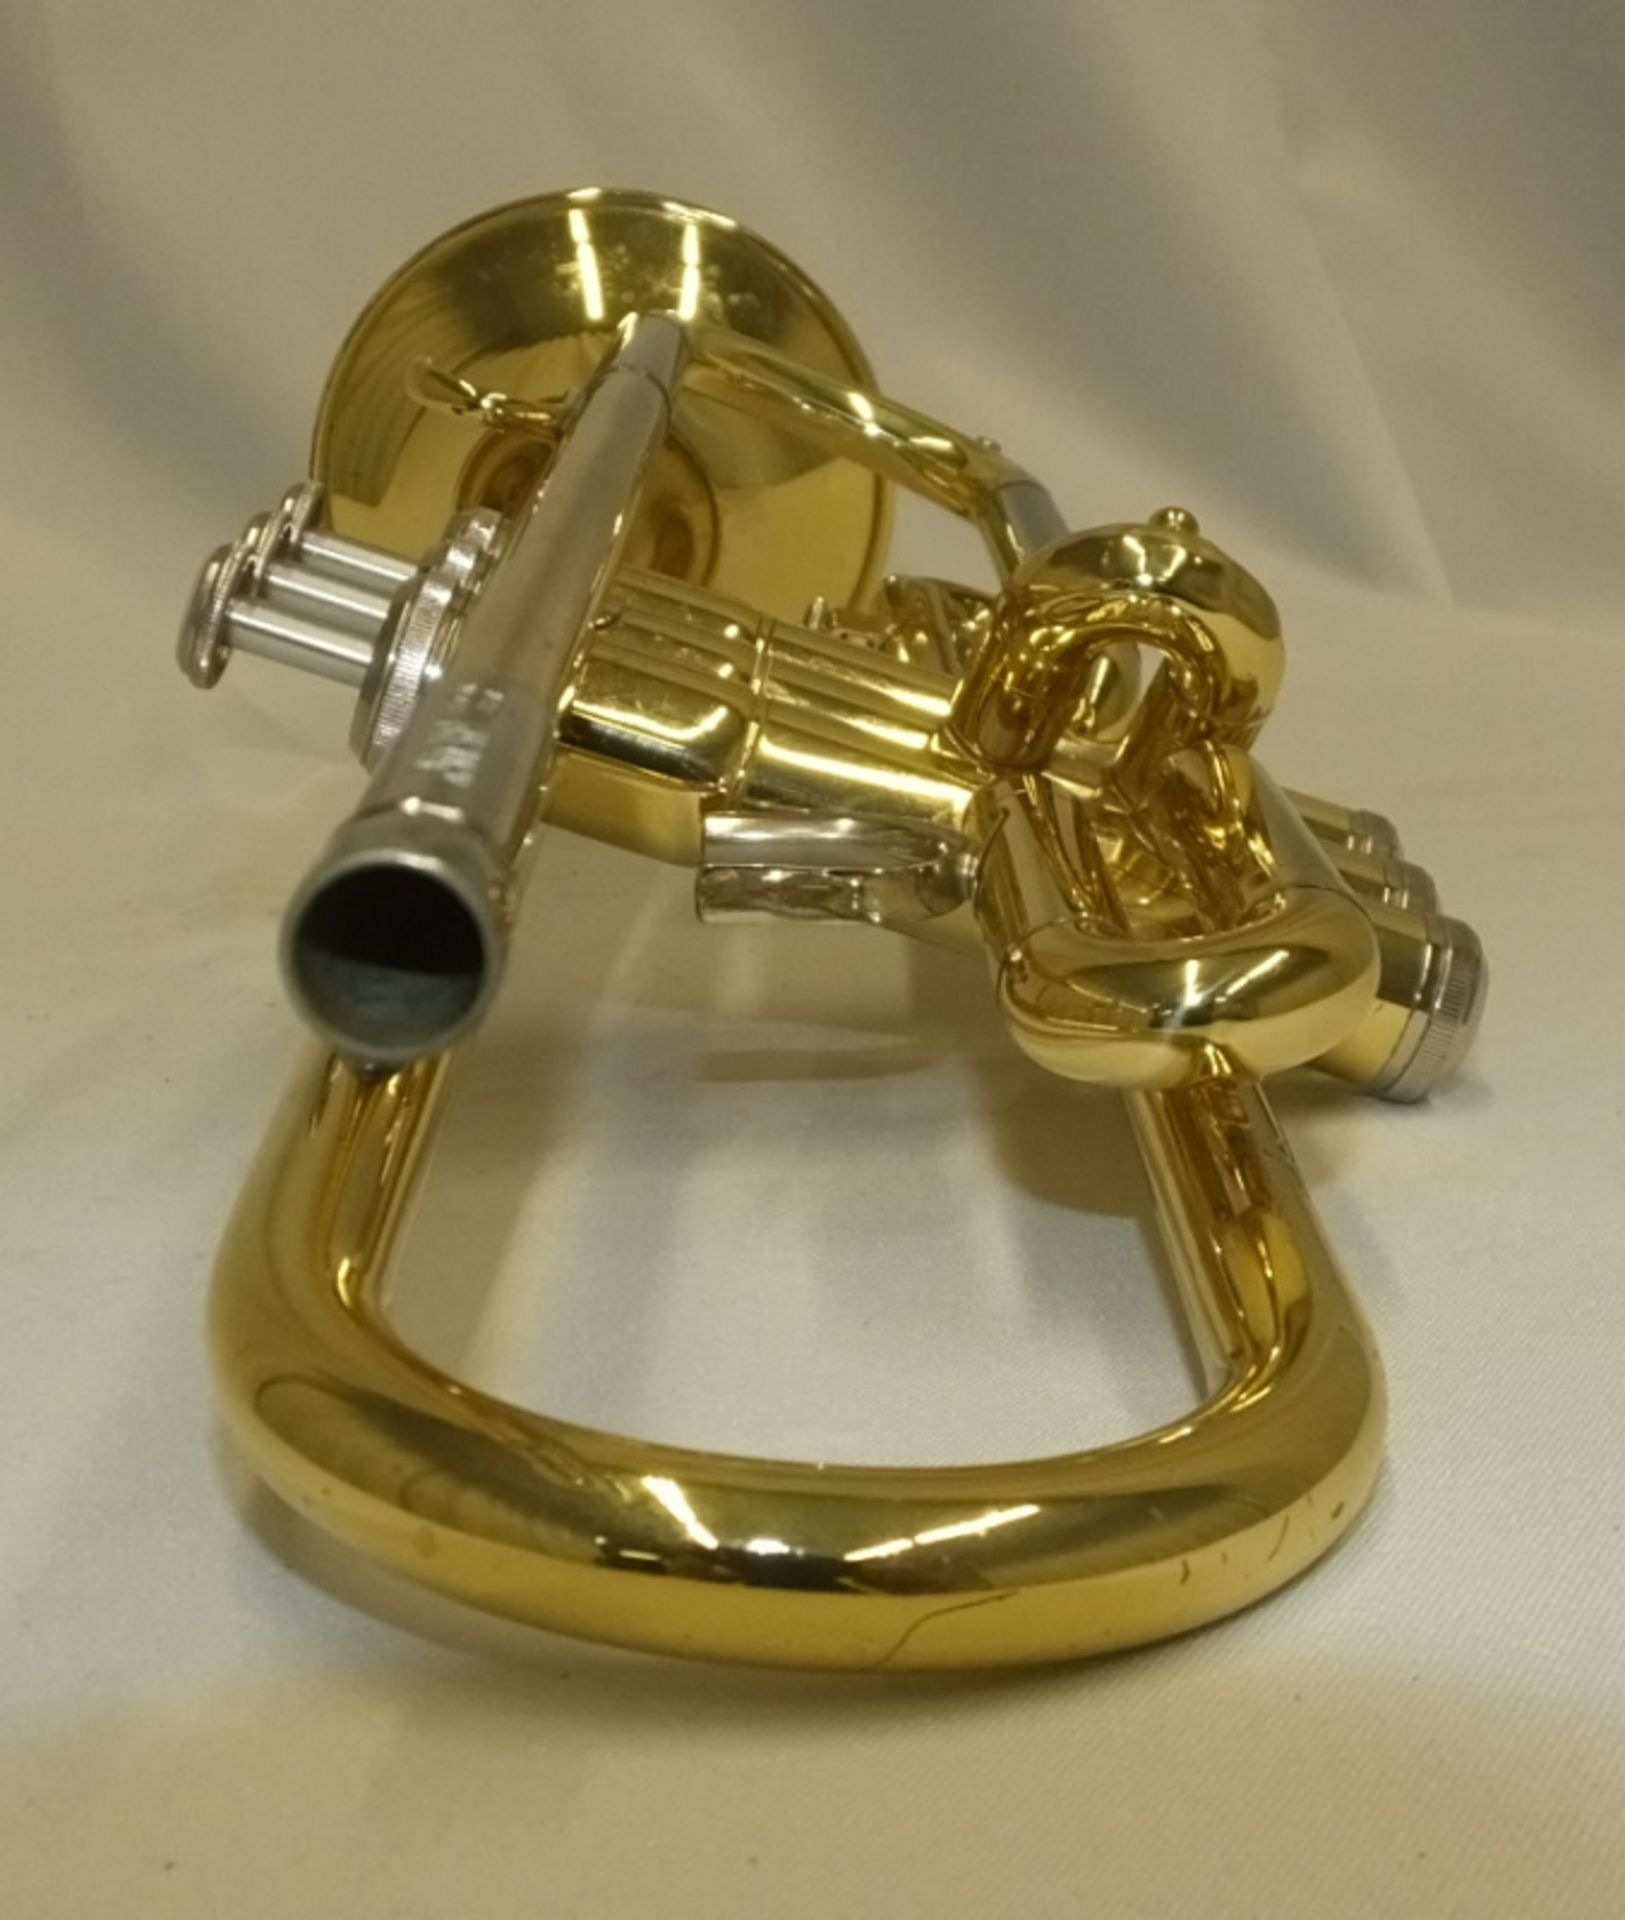 Yamaha YTR 2320E Trumpet in case - serial number 313785 - Please check photos carefully - Image 8 of 14